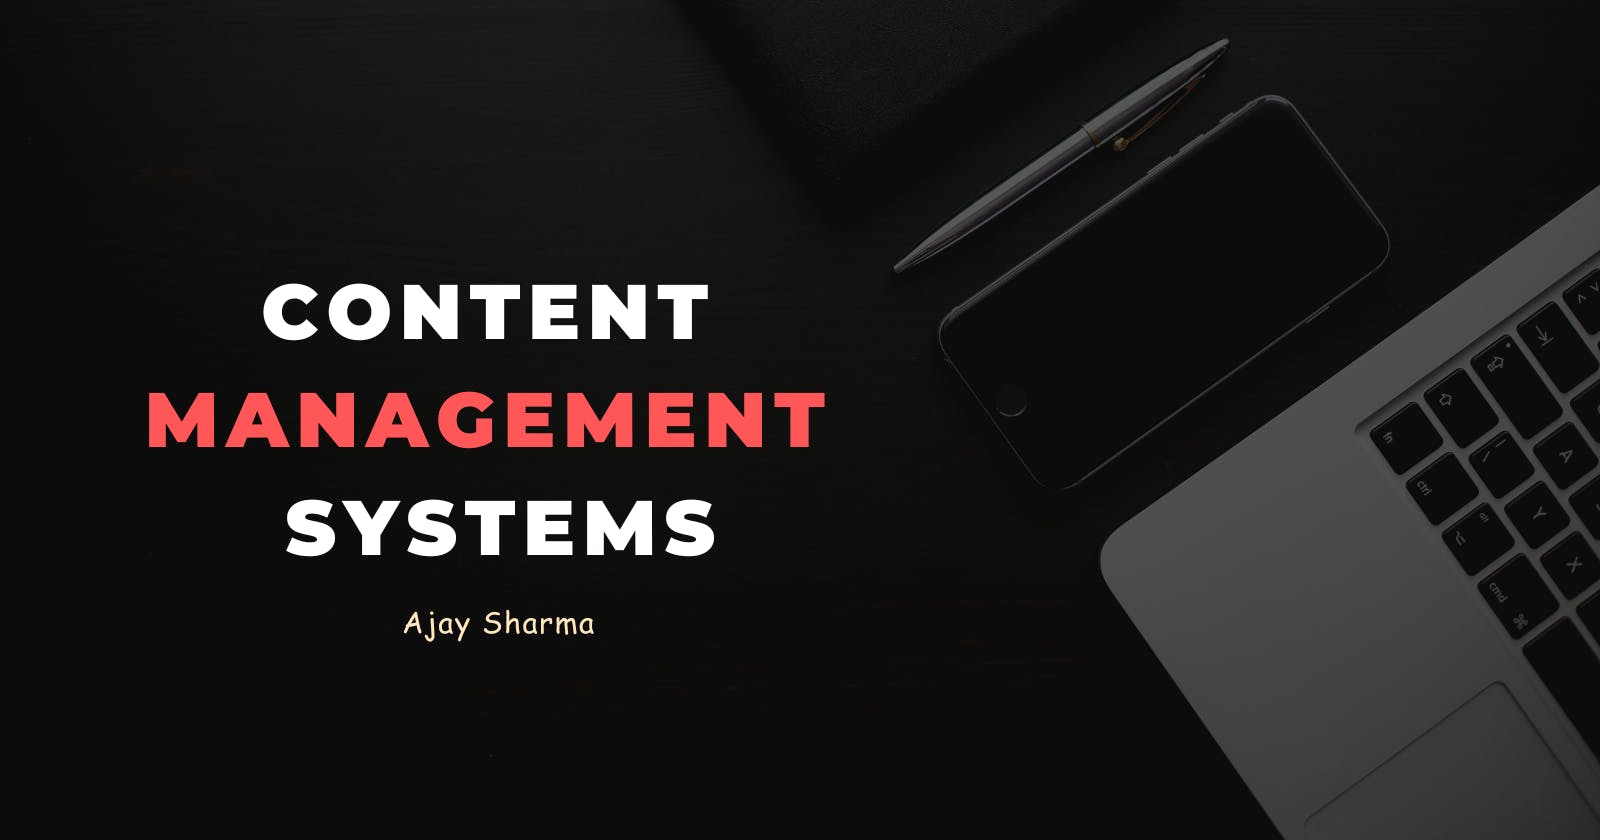 Introduction to Content Management Systems (CMS) for Web Development